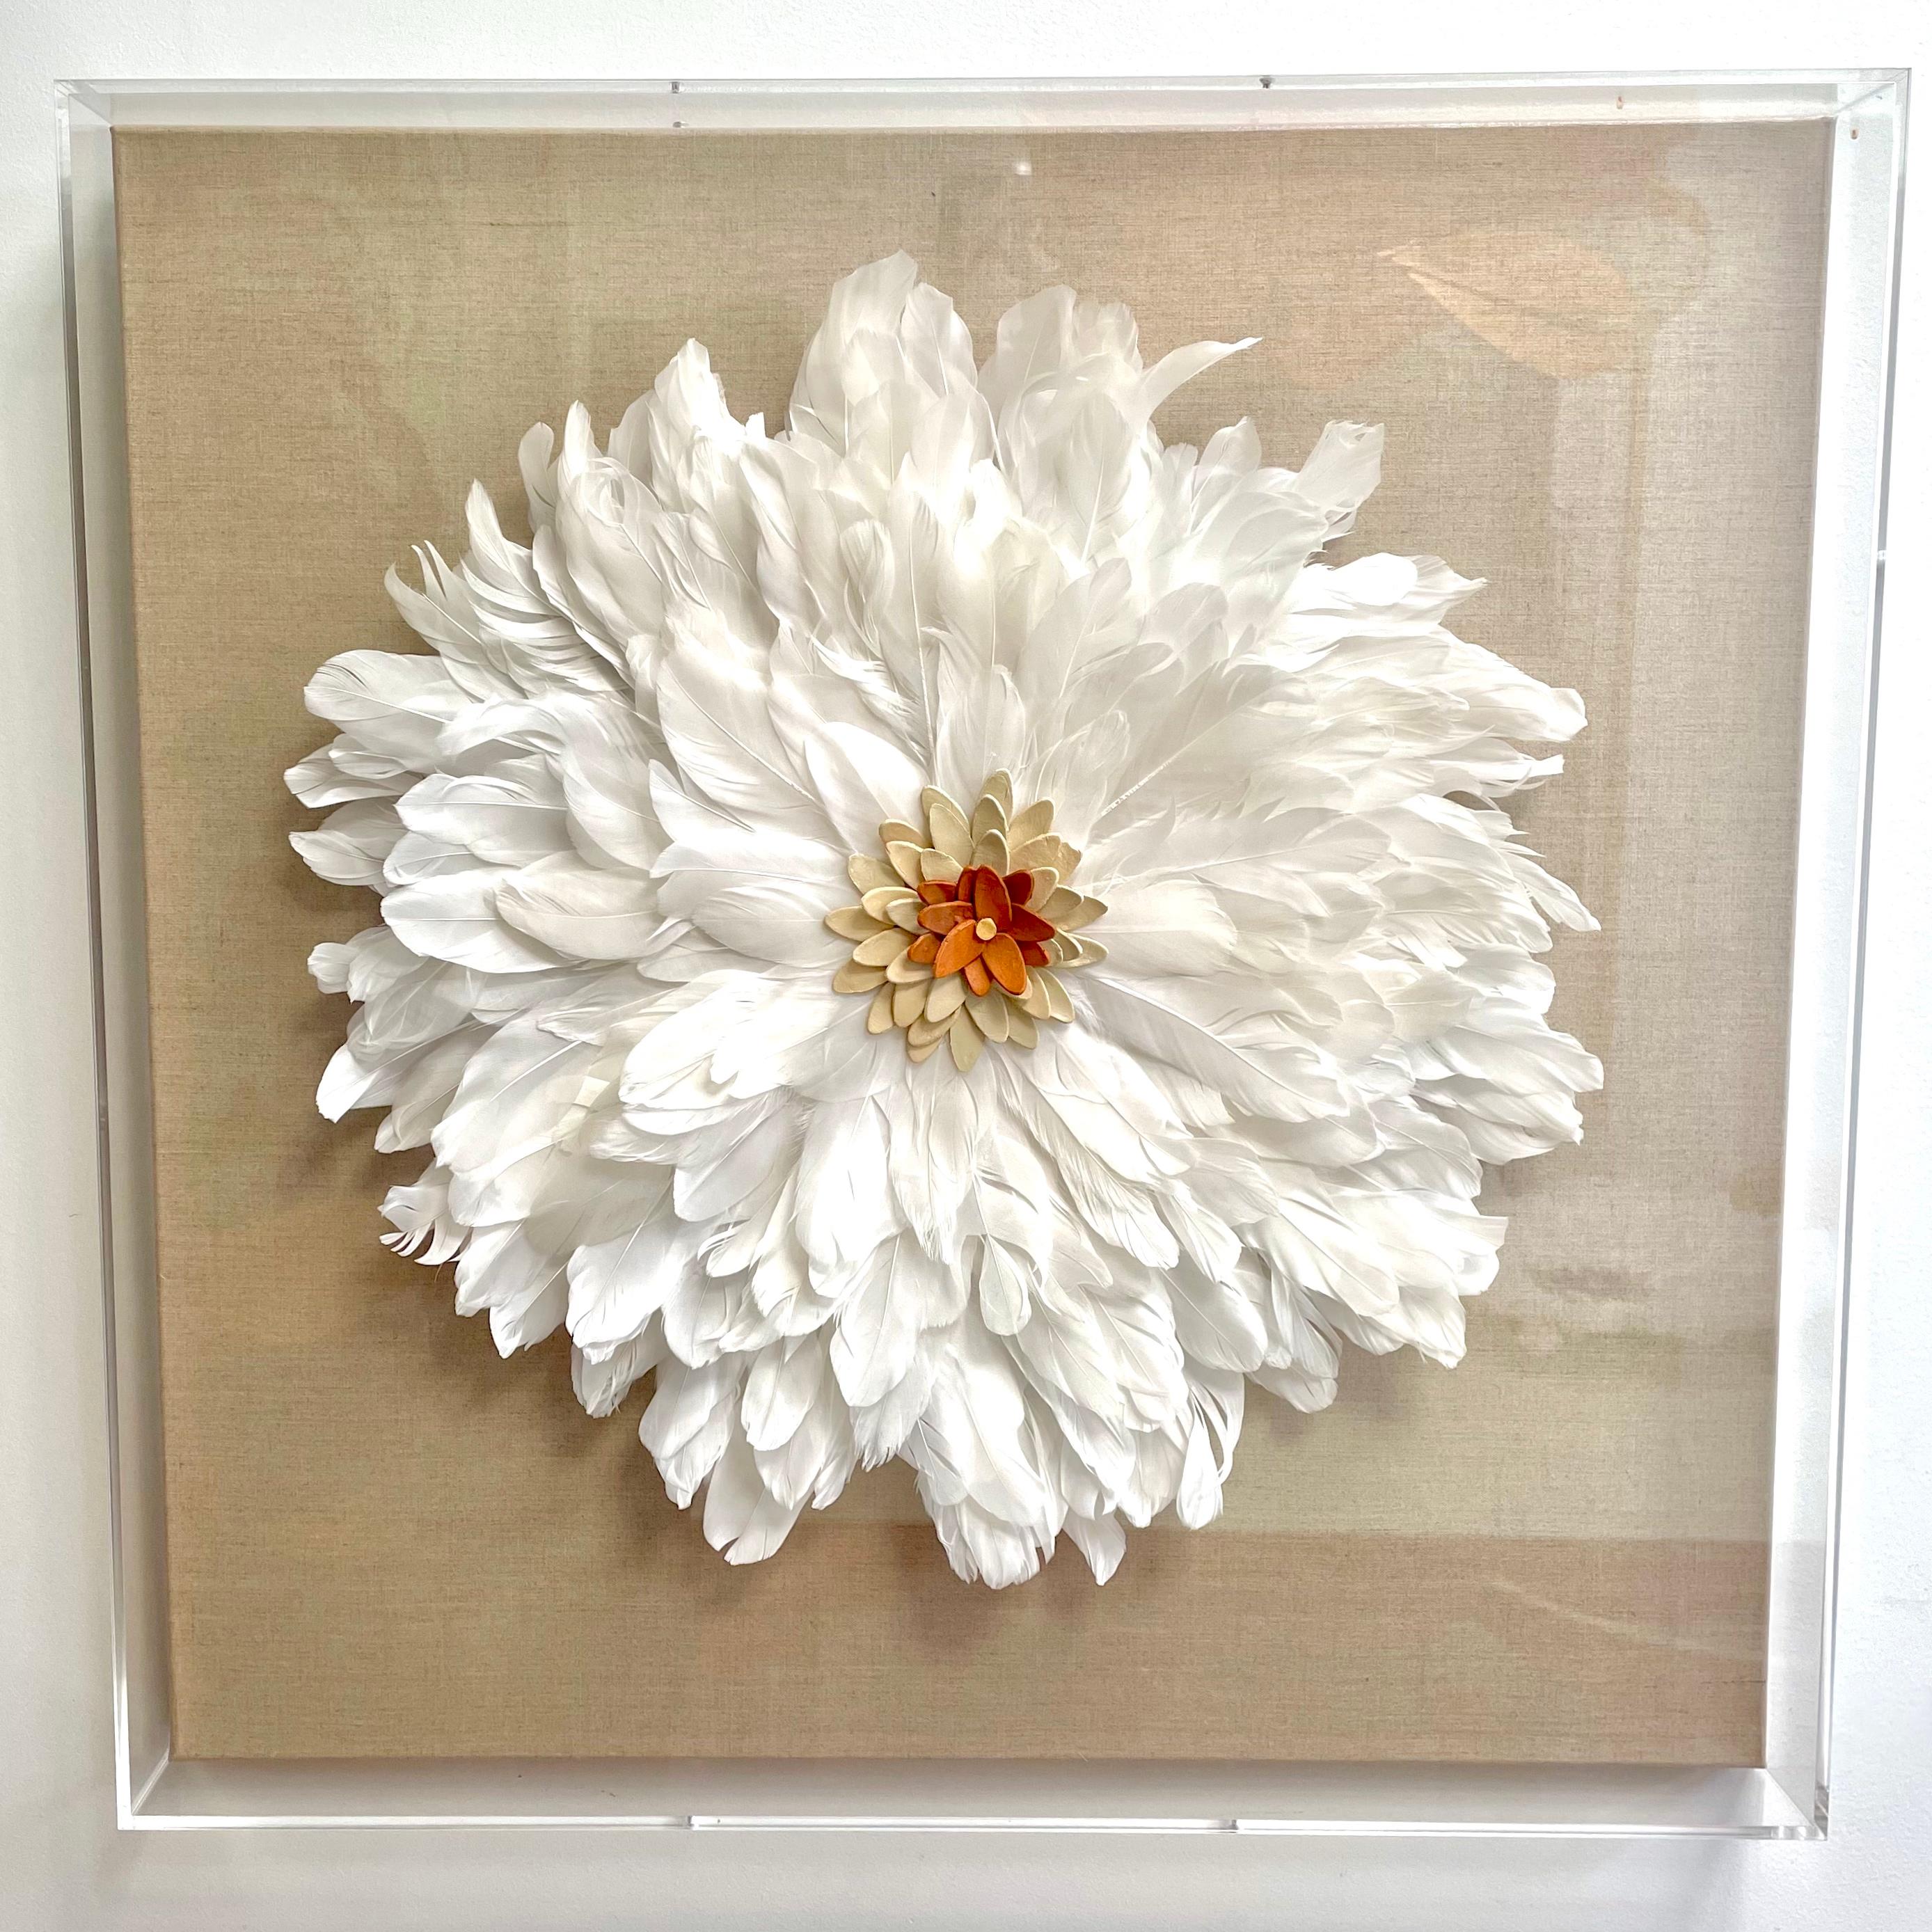 Flores 1 - 3D nature inspired floral composition feather, clay in plexiglass box - Contemporary Mixed Media Art by Marie Laforey